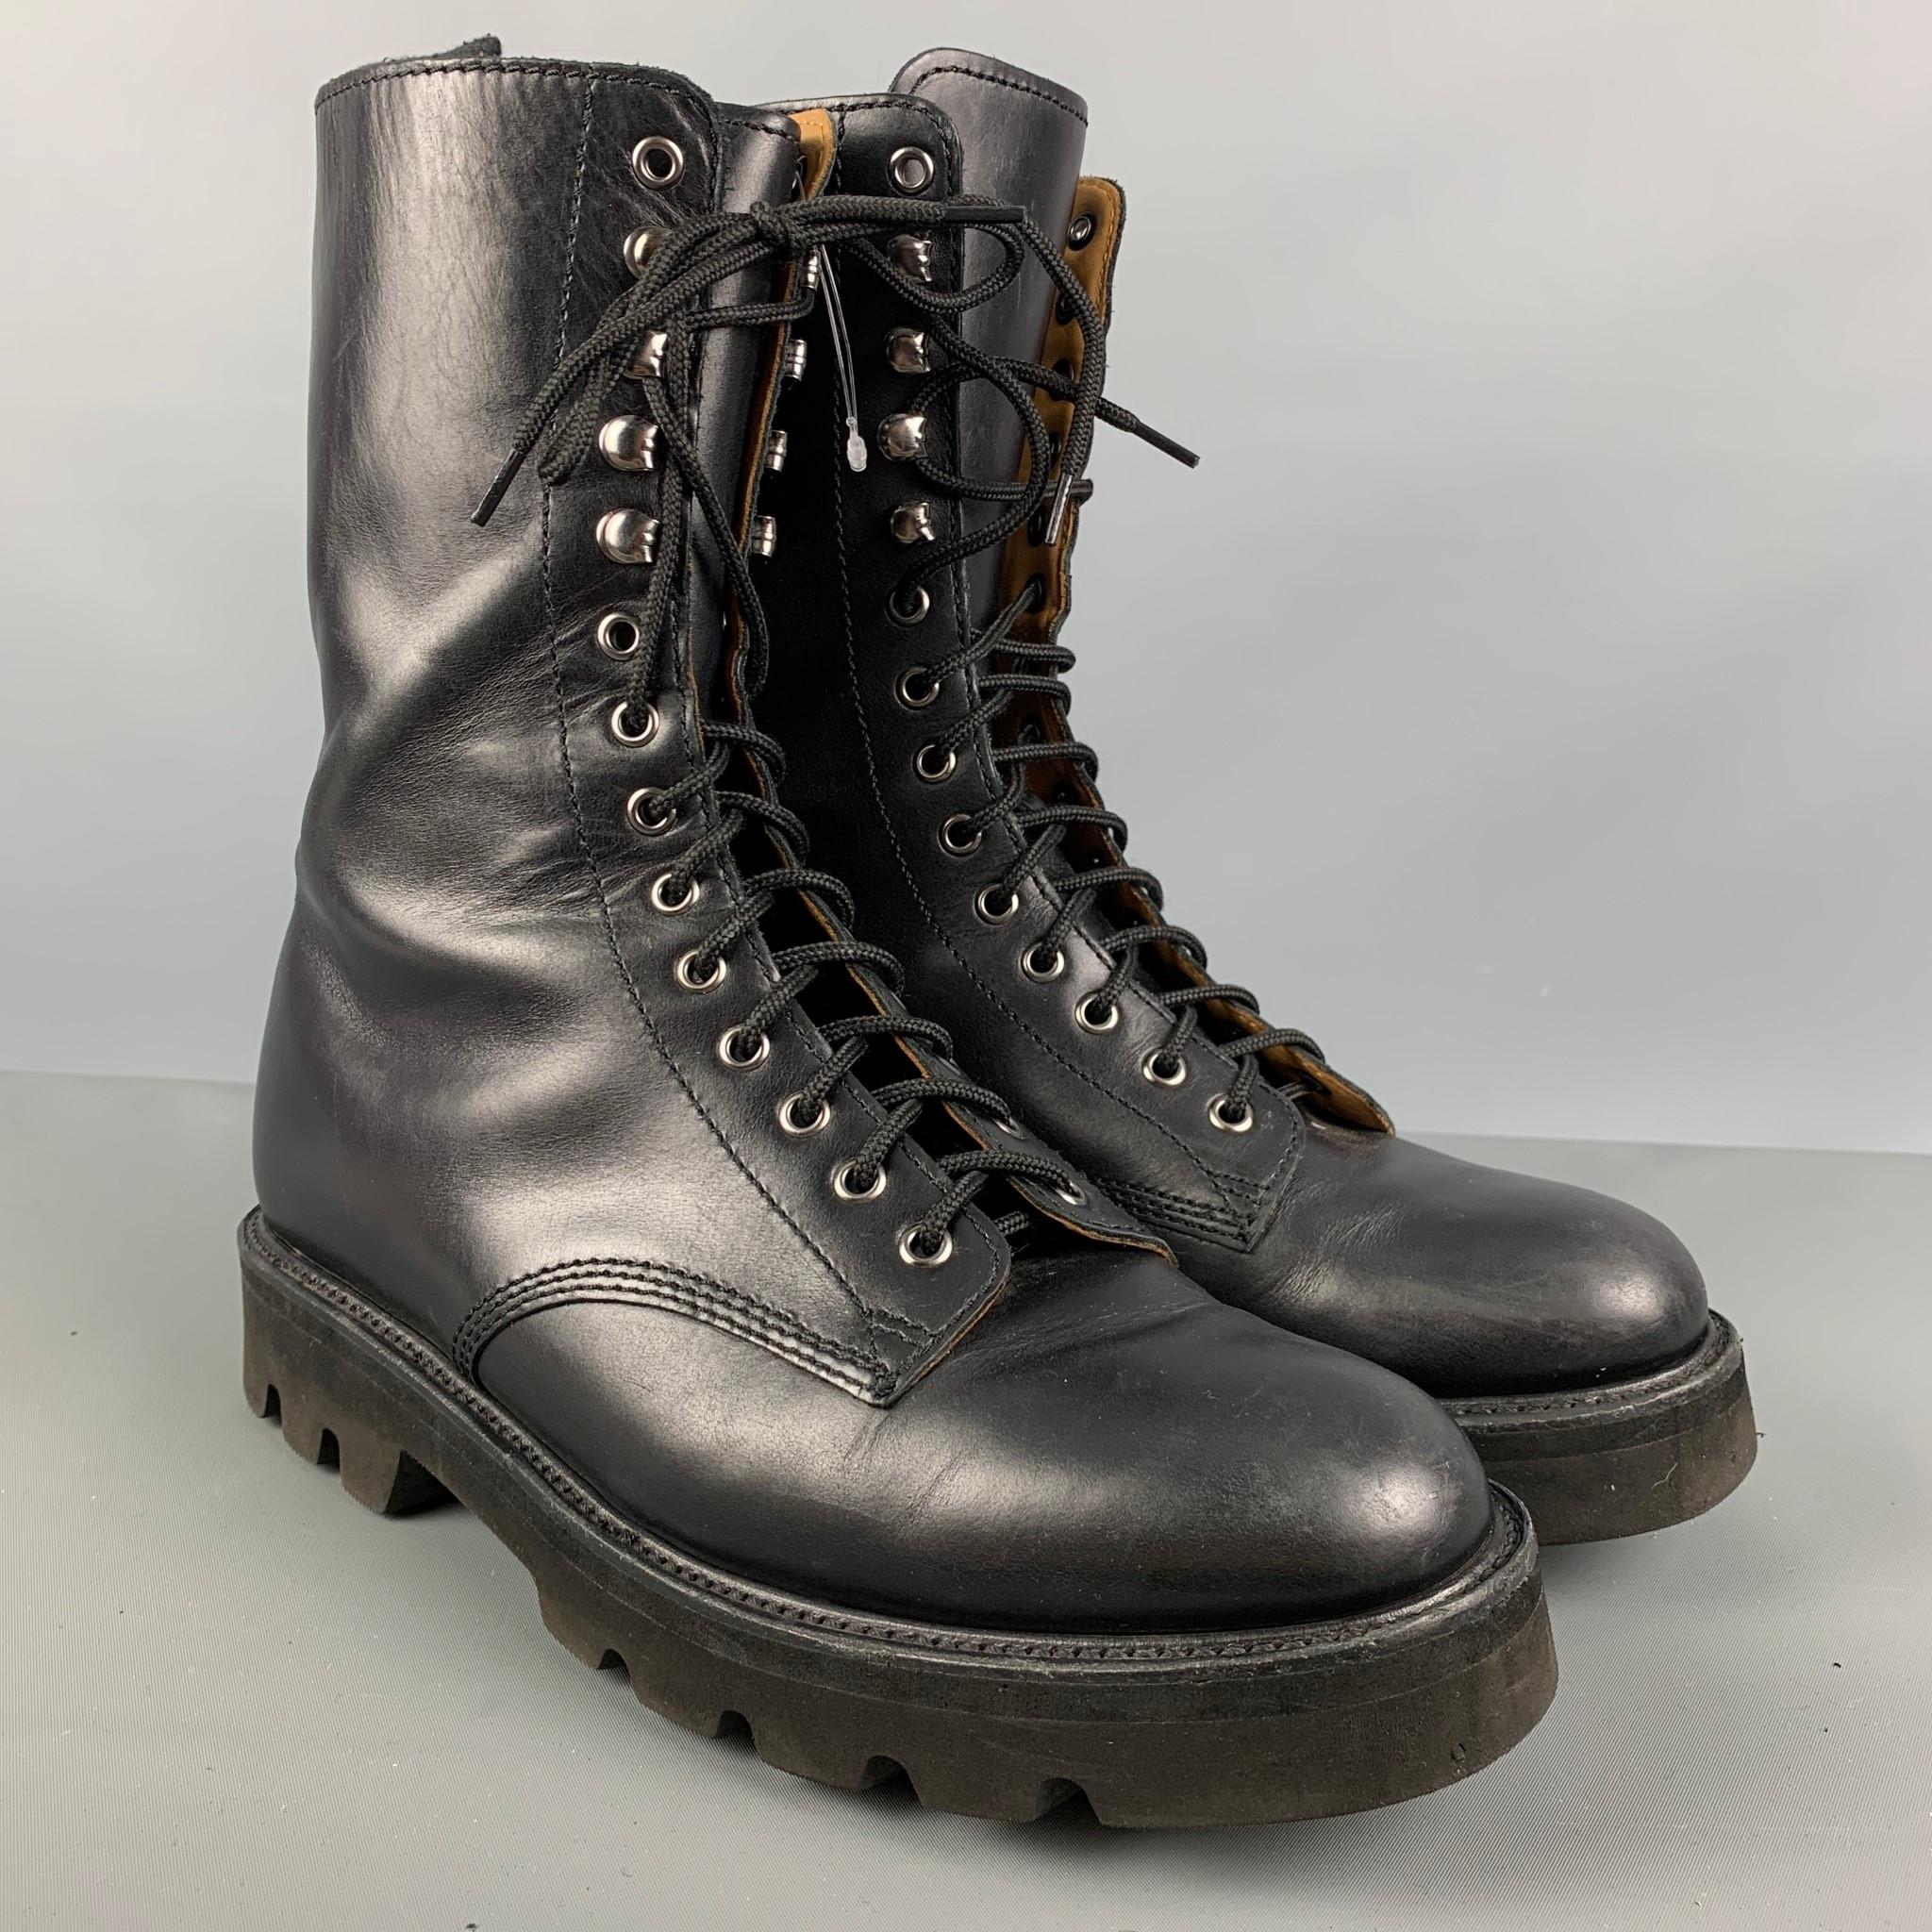 GRENSON boots comes in a black leather featuring a mid-calf length, rubber sole, and a lace up closure.

Excellent Pre-Owned Condition.
Marked: 113127 10 G

Measurements:

Length: 13 in.
Width: 5 in.
Height: 10 in. 

SKU: 124534
Category: